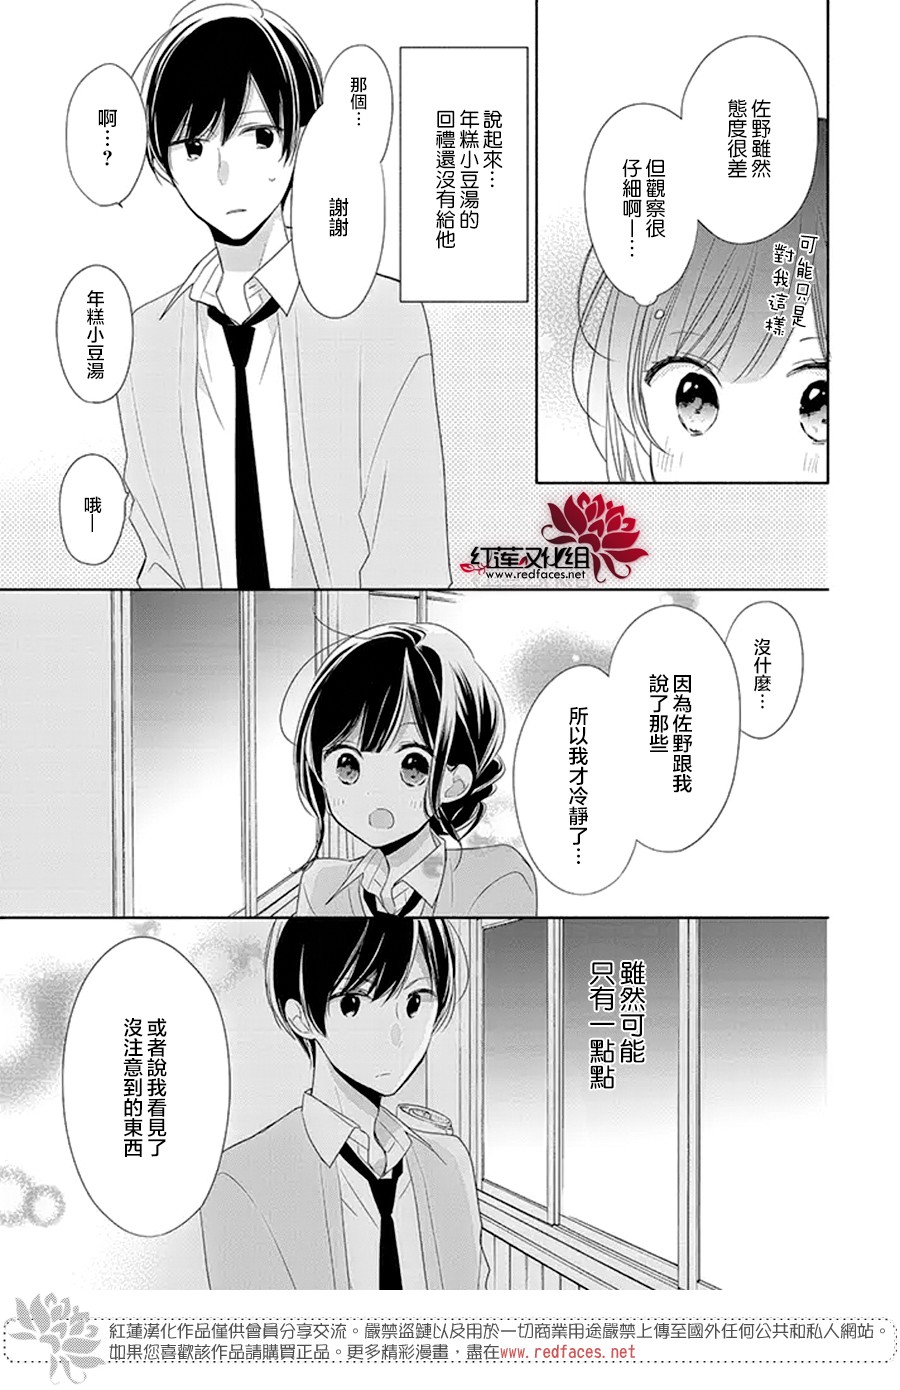 If given a second chance - 17話 - 5